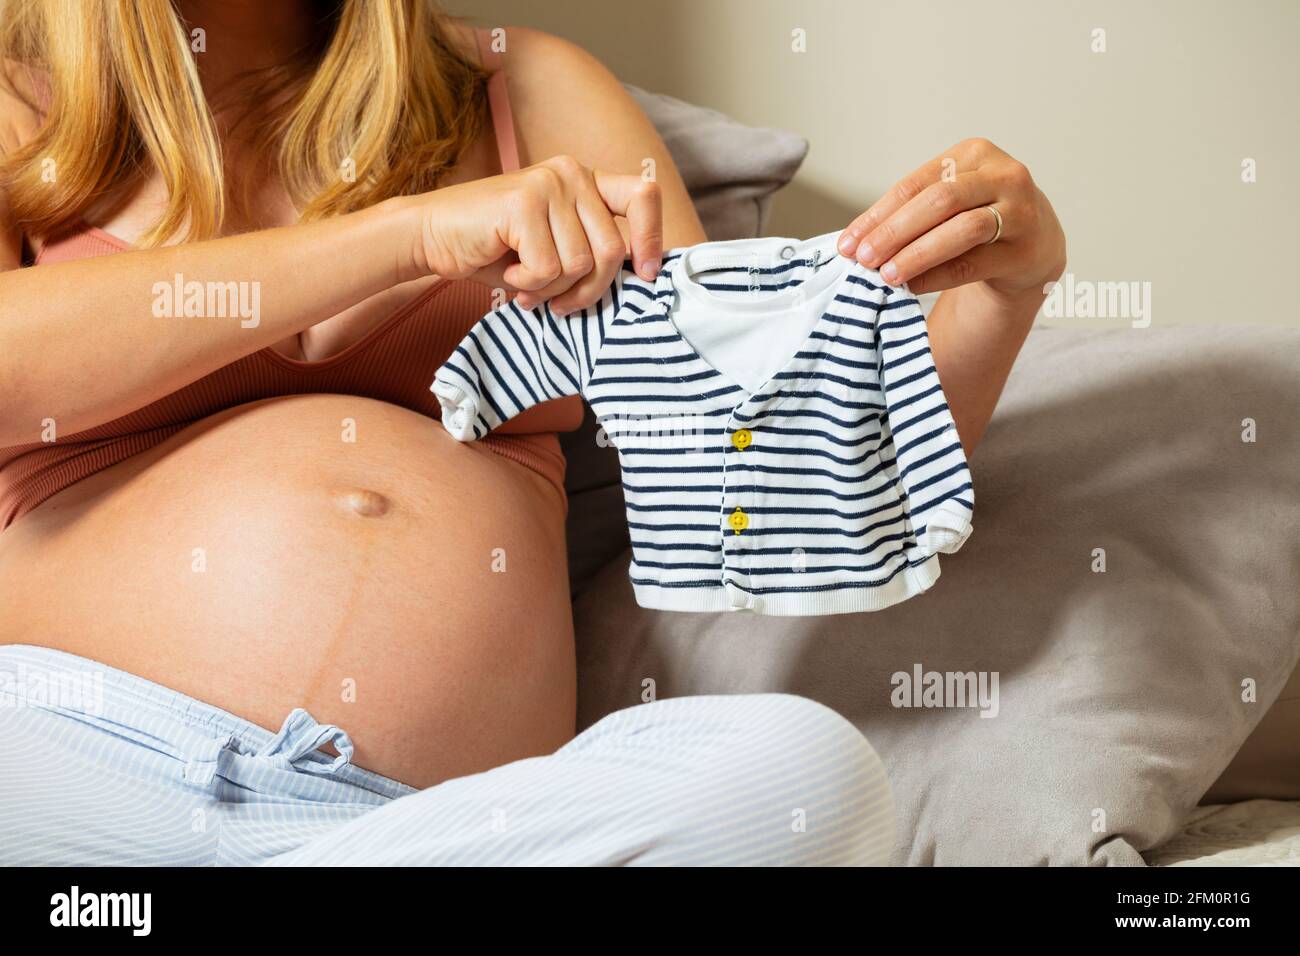 Pregnant woman play with tiny clothes for new baby Stock Photo